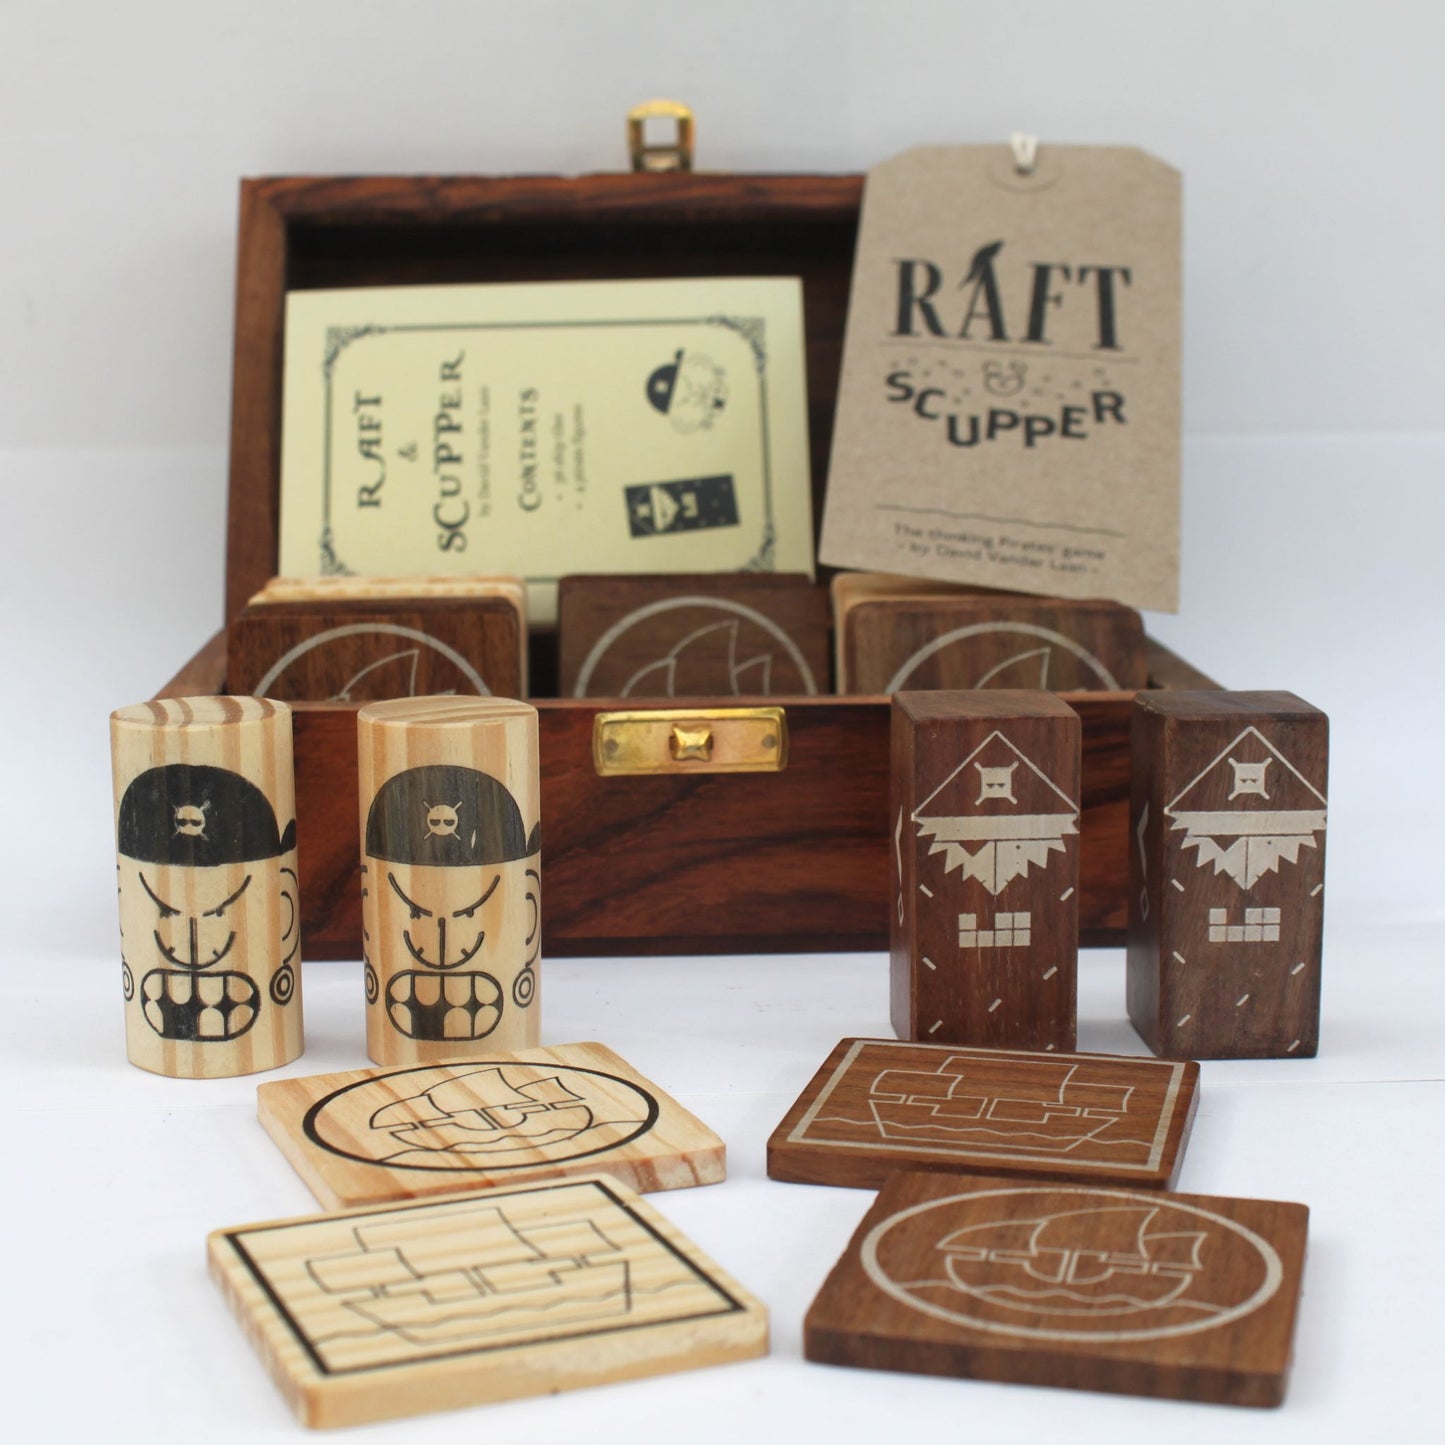 Raft and Scupper fair trade wooden game from Good Things